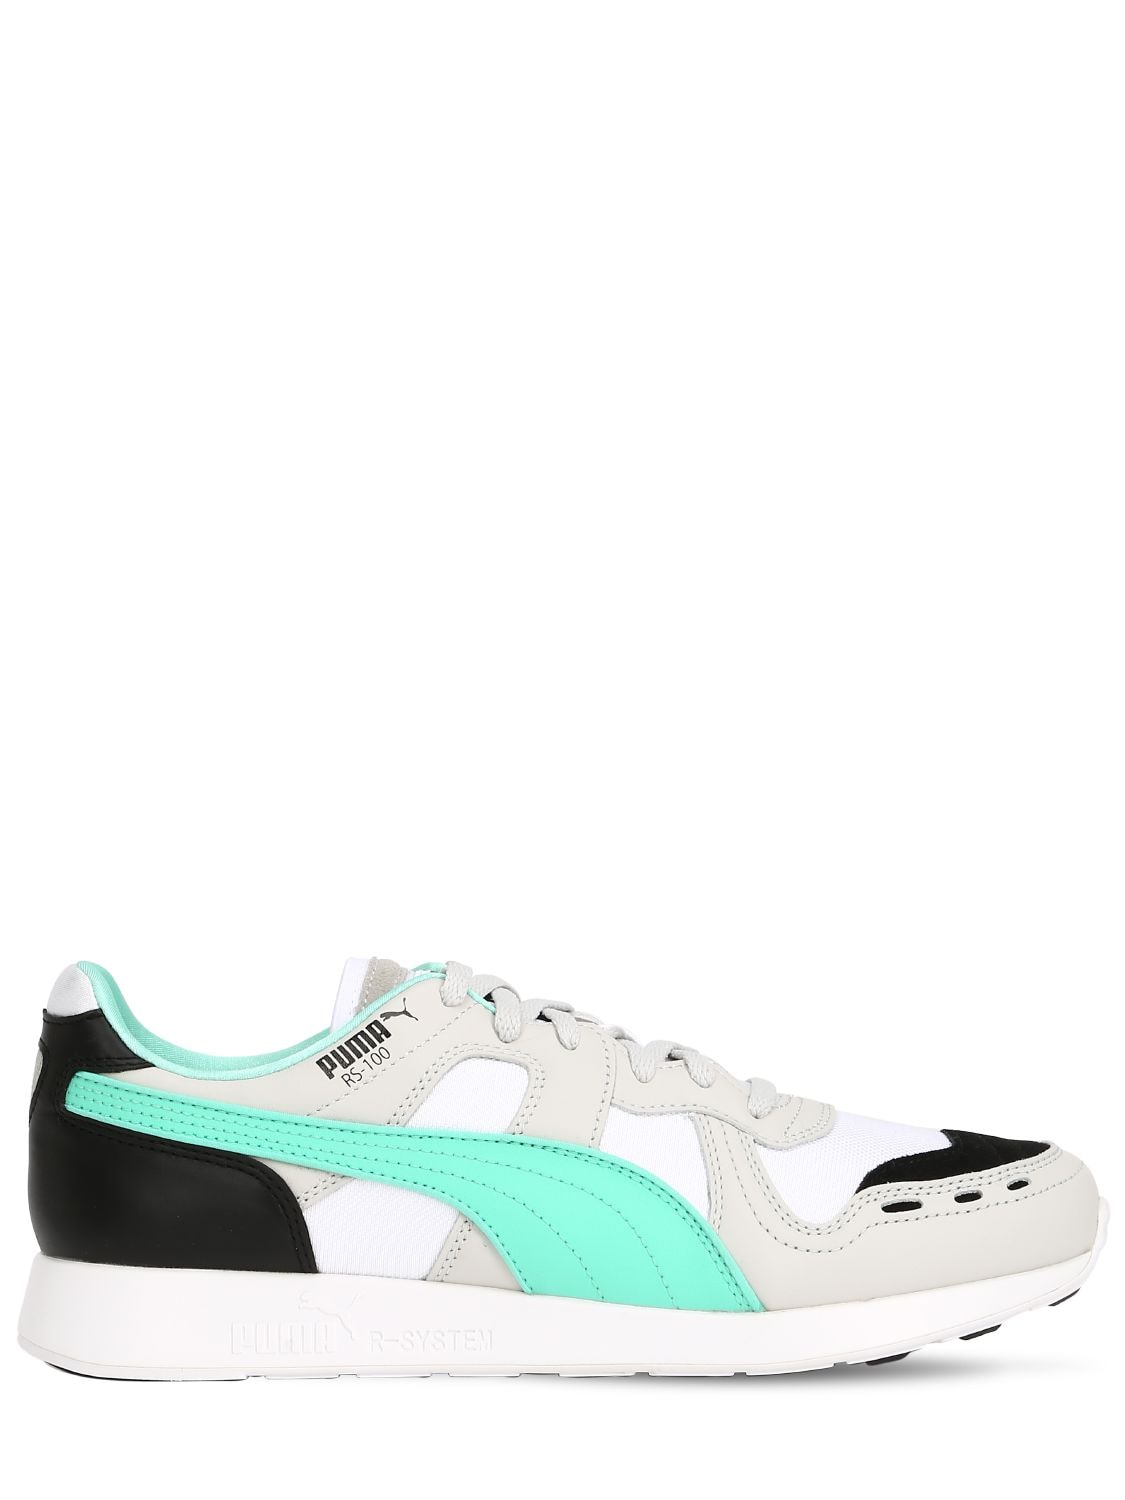 PUMA RS-100 RE-INVENTION trainers,68I0II008-MDE1